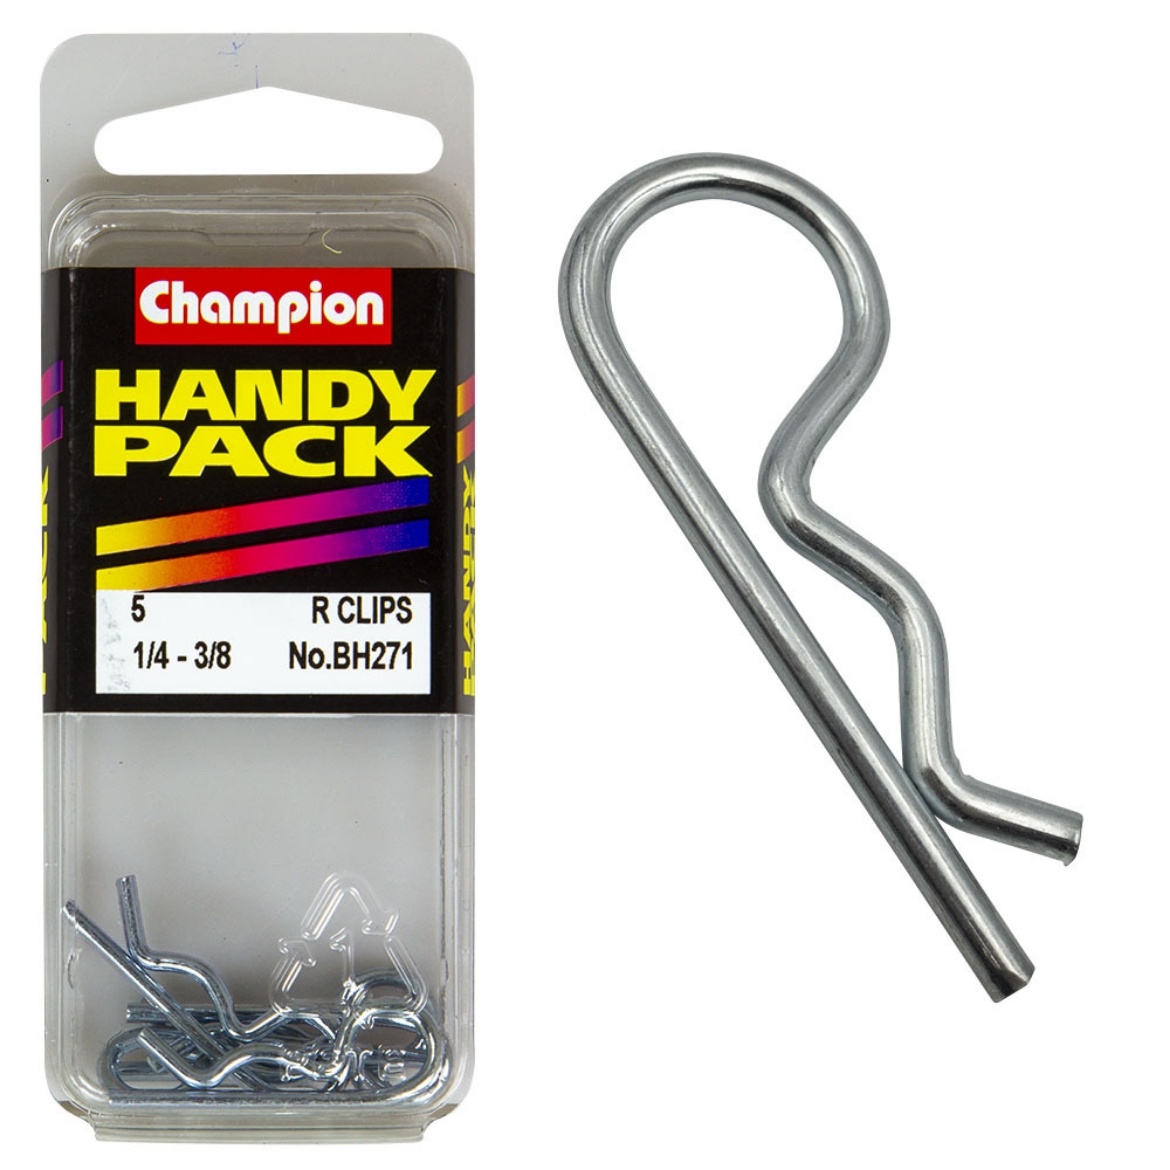 Picture of Handy Pk 'R' Clips 1/4 - 3/8 shaft RCL (Pkt.5)